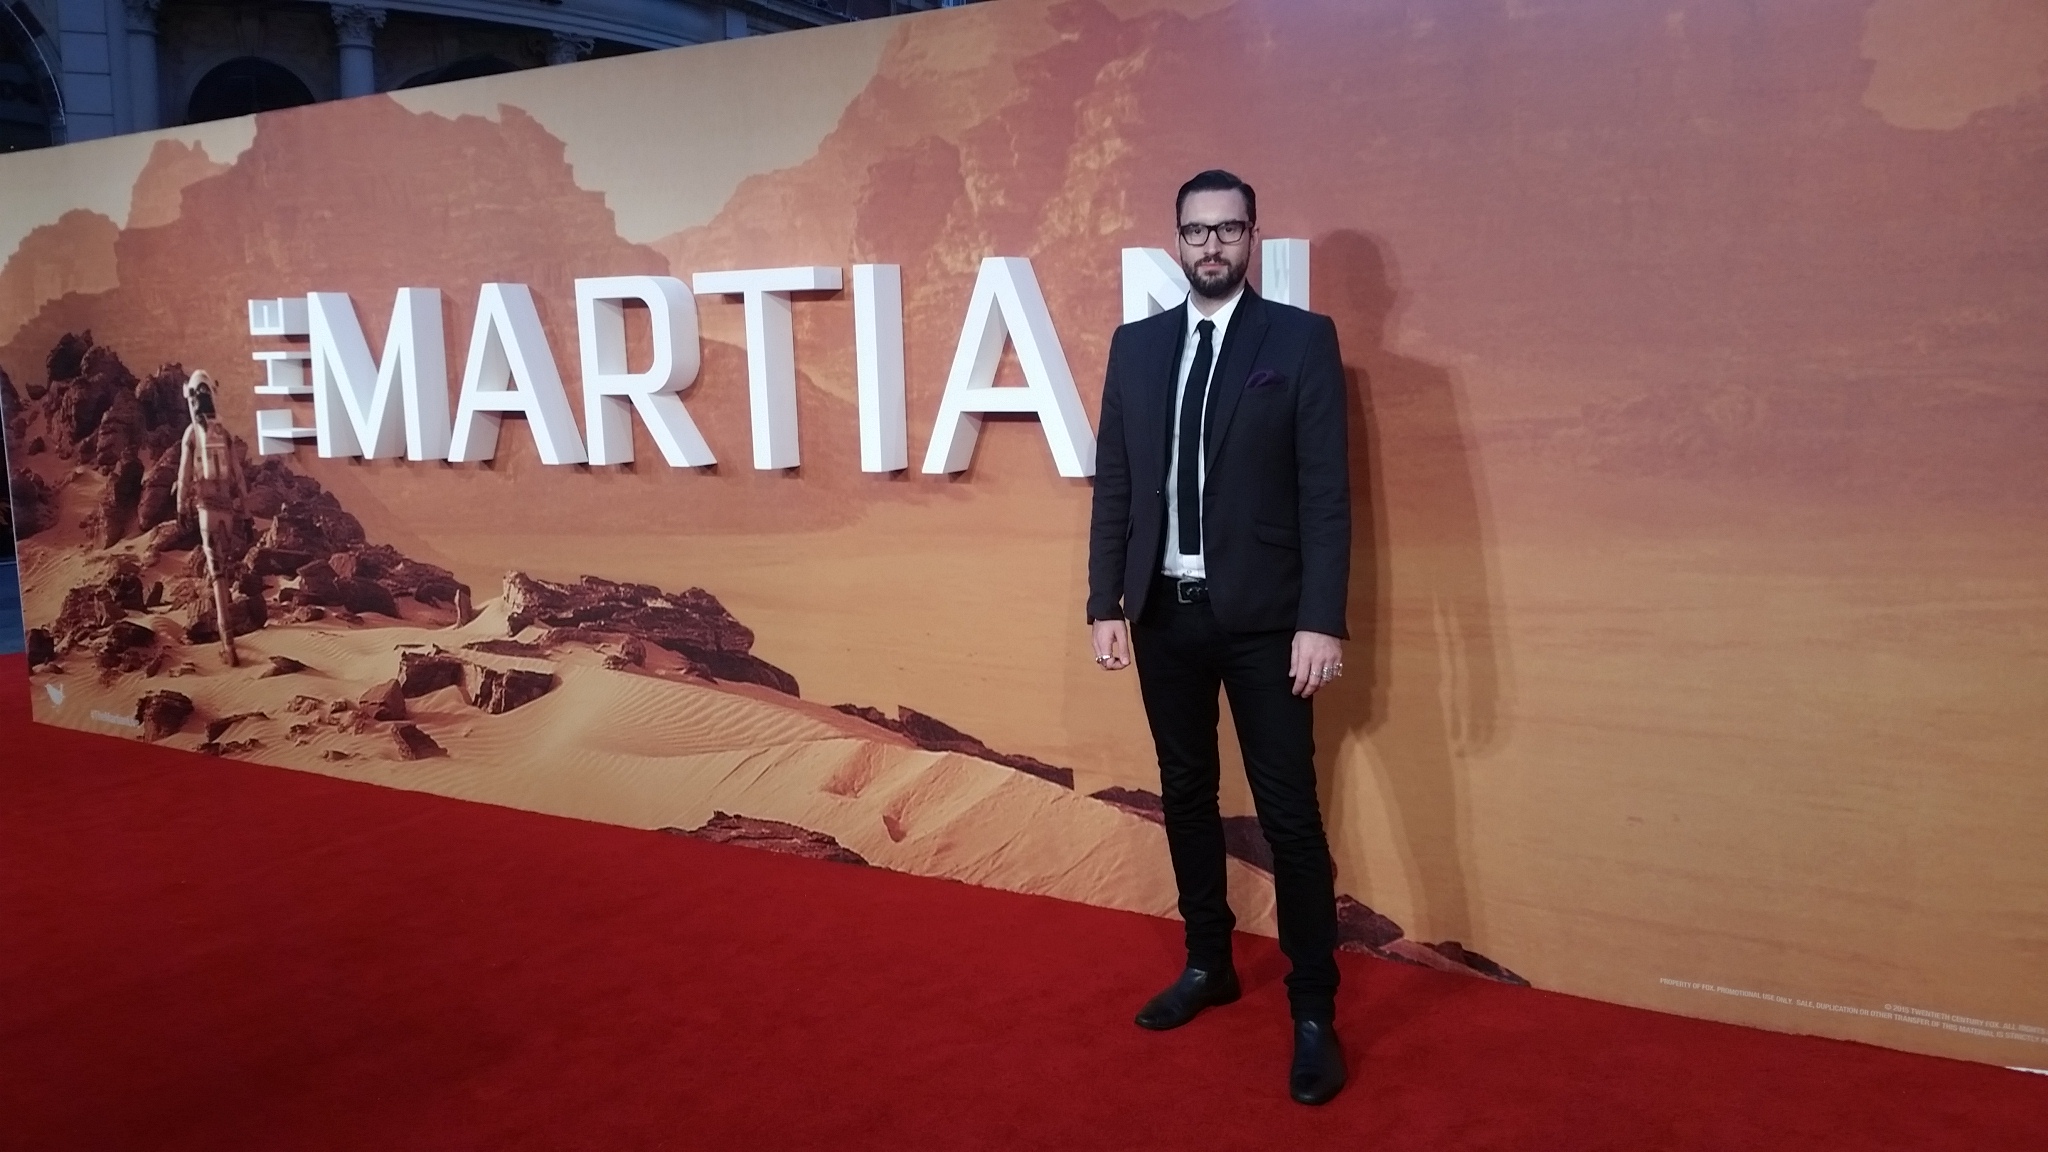 The Martian Premier with Fox Movies